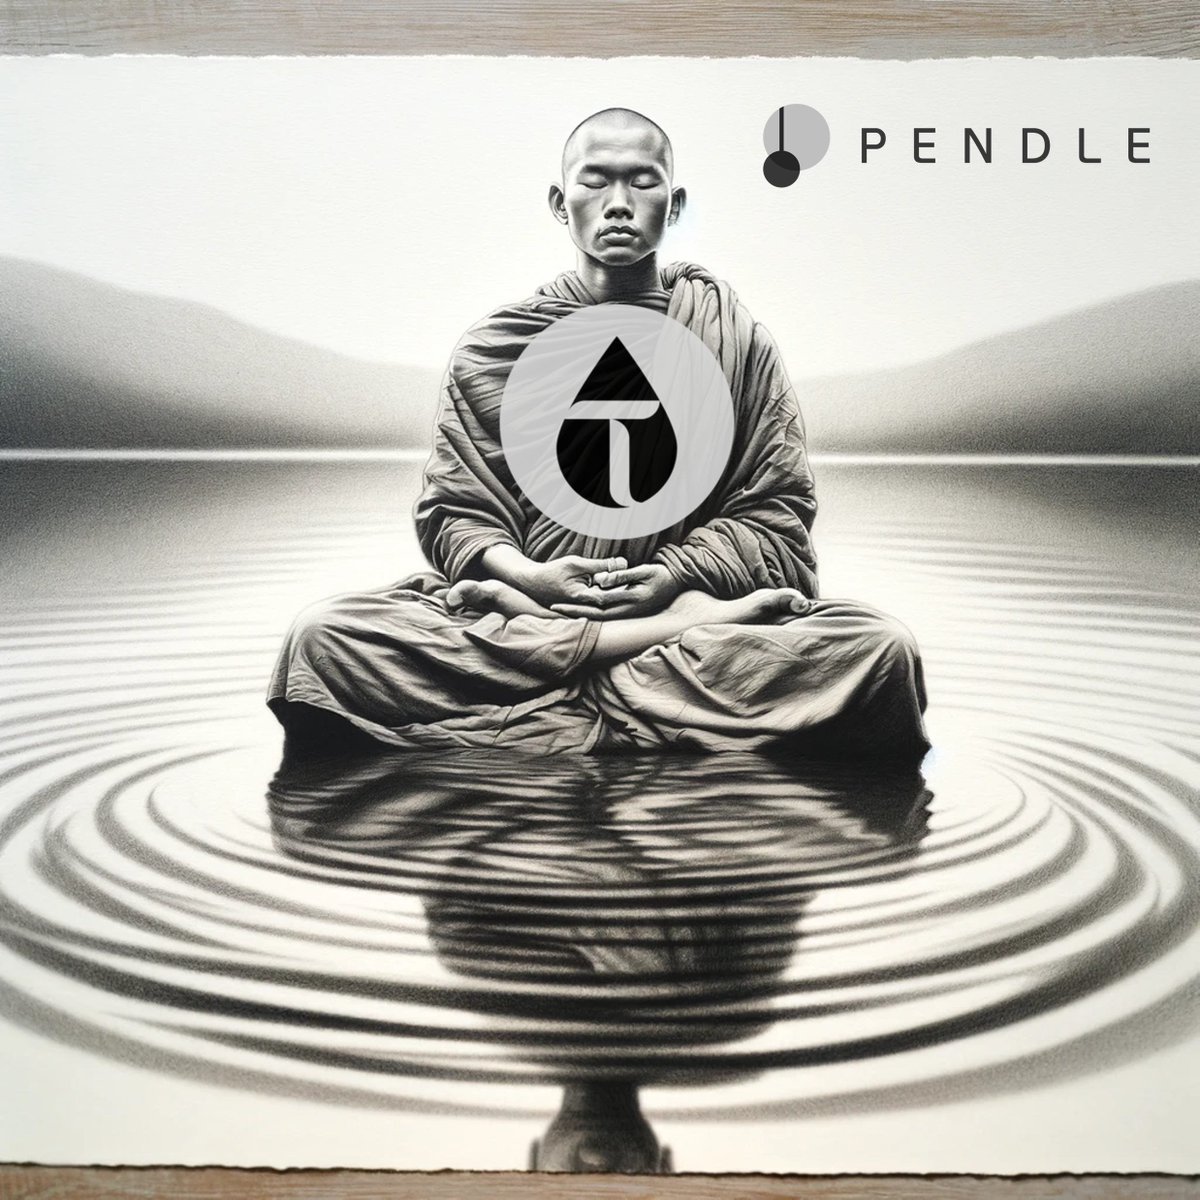 The @pendle_fi Print #12 is out (link in tweet below) - New stTAO 27-JUN-24 pool by @bittensor_ - More USDe pools (Arbi + Zircuit) - $ENA staking boost for YT-USDe - New insurance cover by @Quantstamp - Pendle vaults on @yearnfi - and more! Please spread the Pendle love!